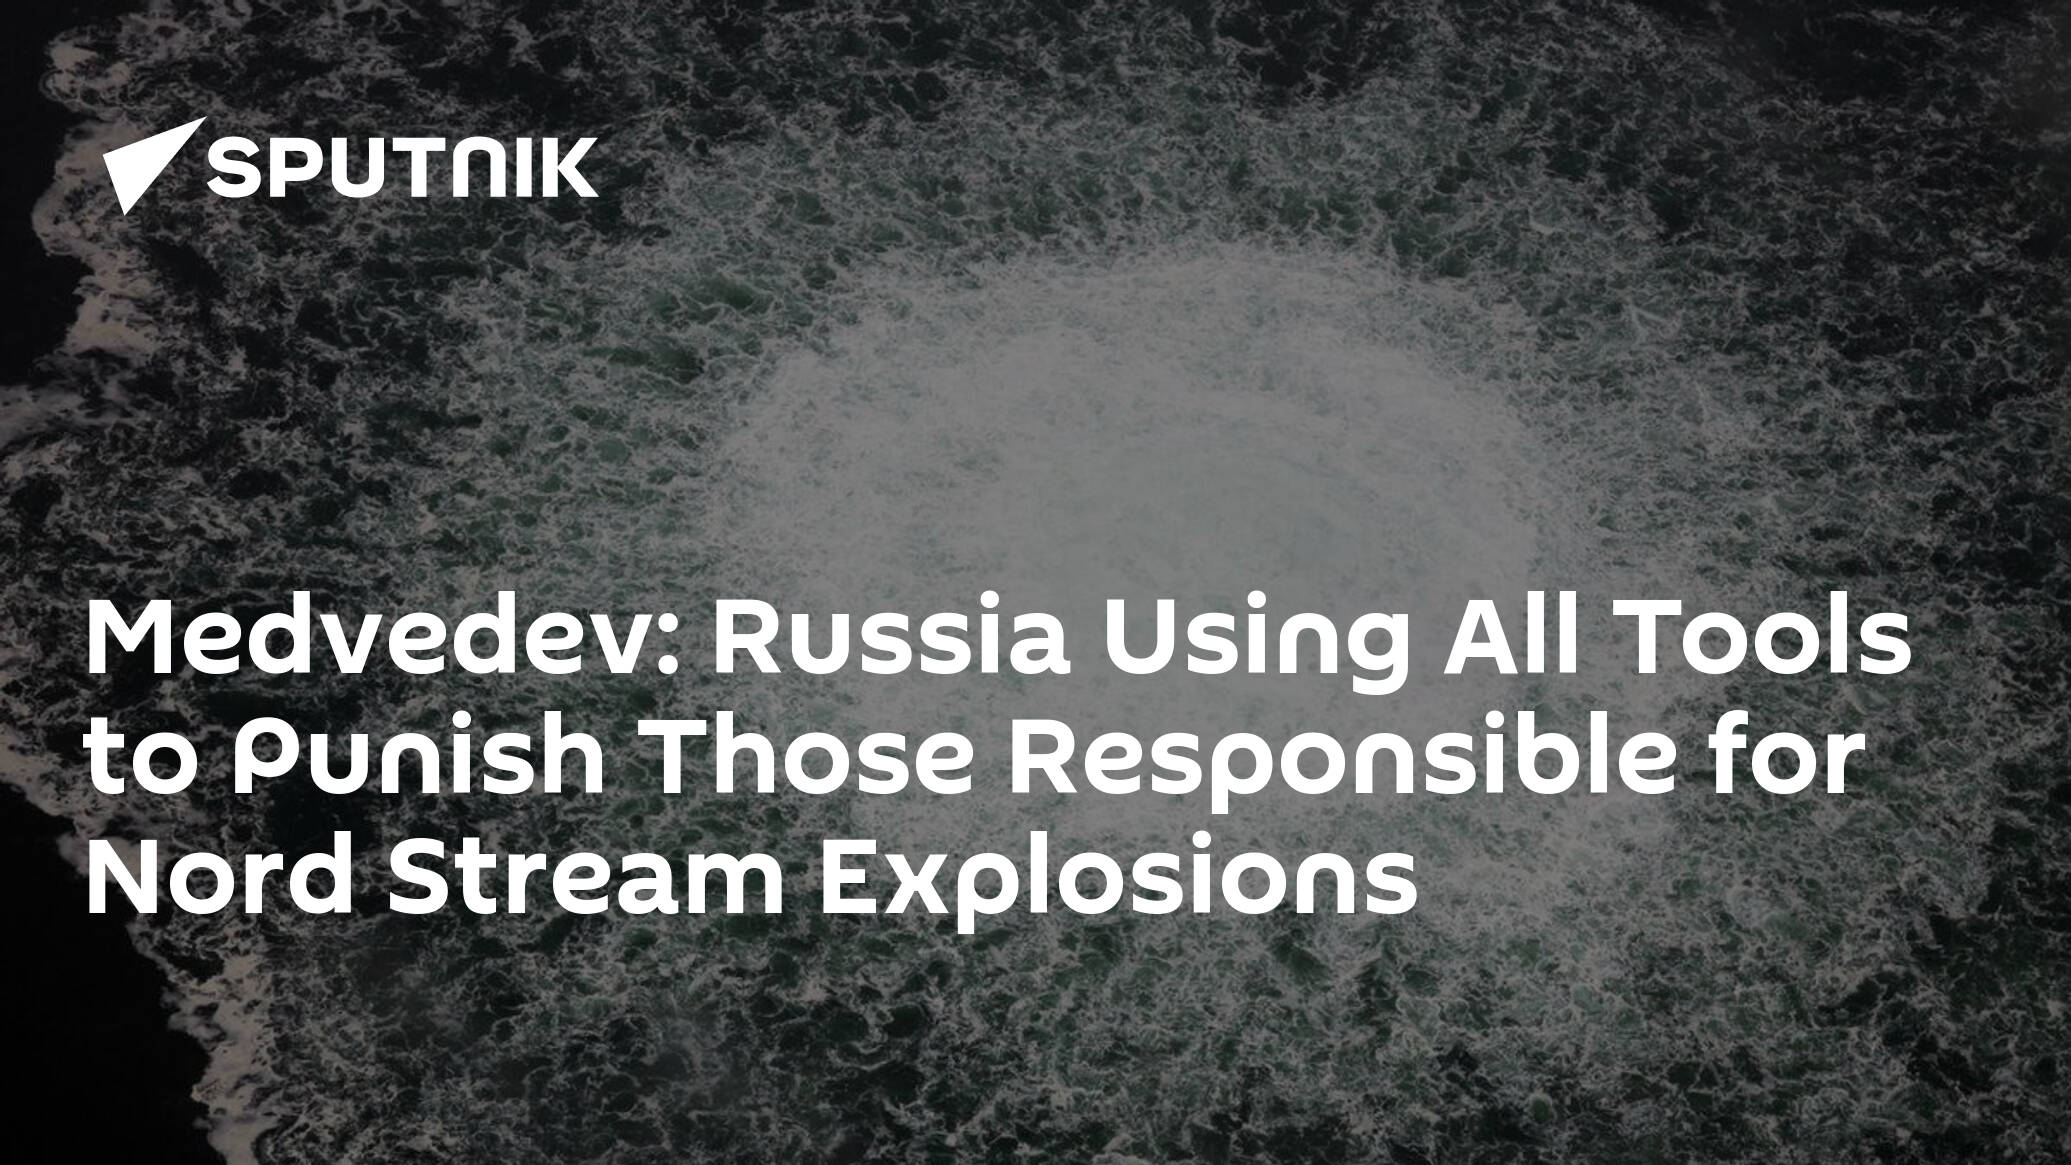 Medvedev: Russia Using All Tools to Punish Those Responsible for Nord Stream Explosions